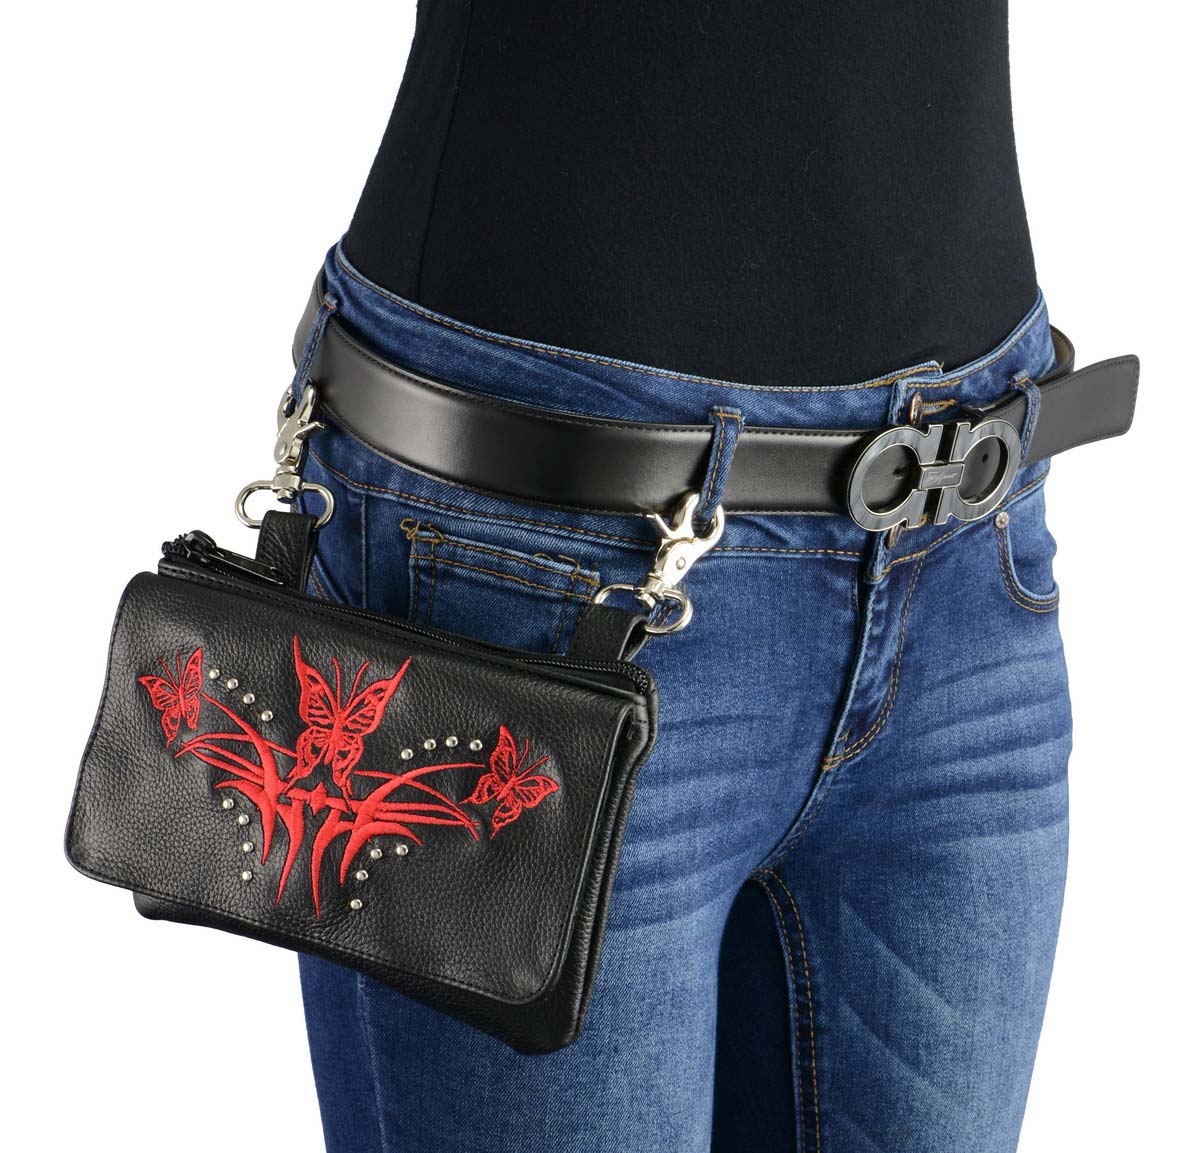 Milwaukee Leather MP8851 Women's Black and Red Leather Multi Pocket Belt Bag with Gun Holster